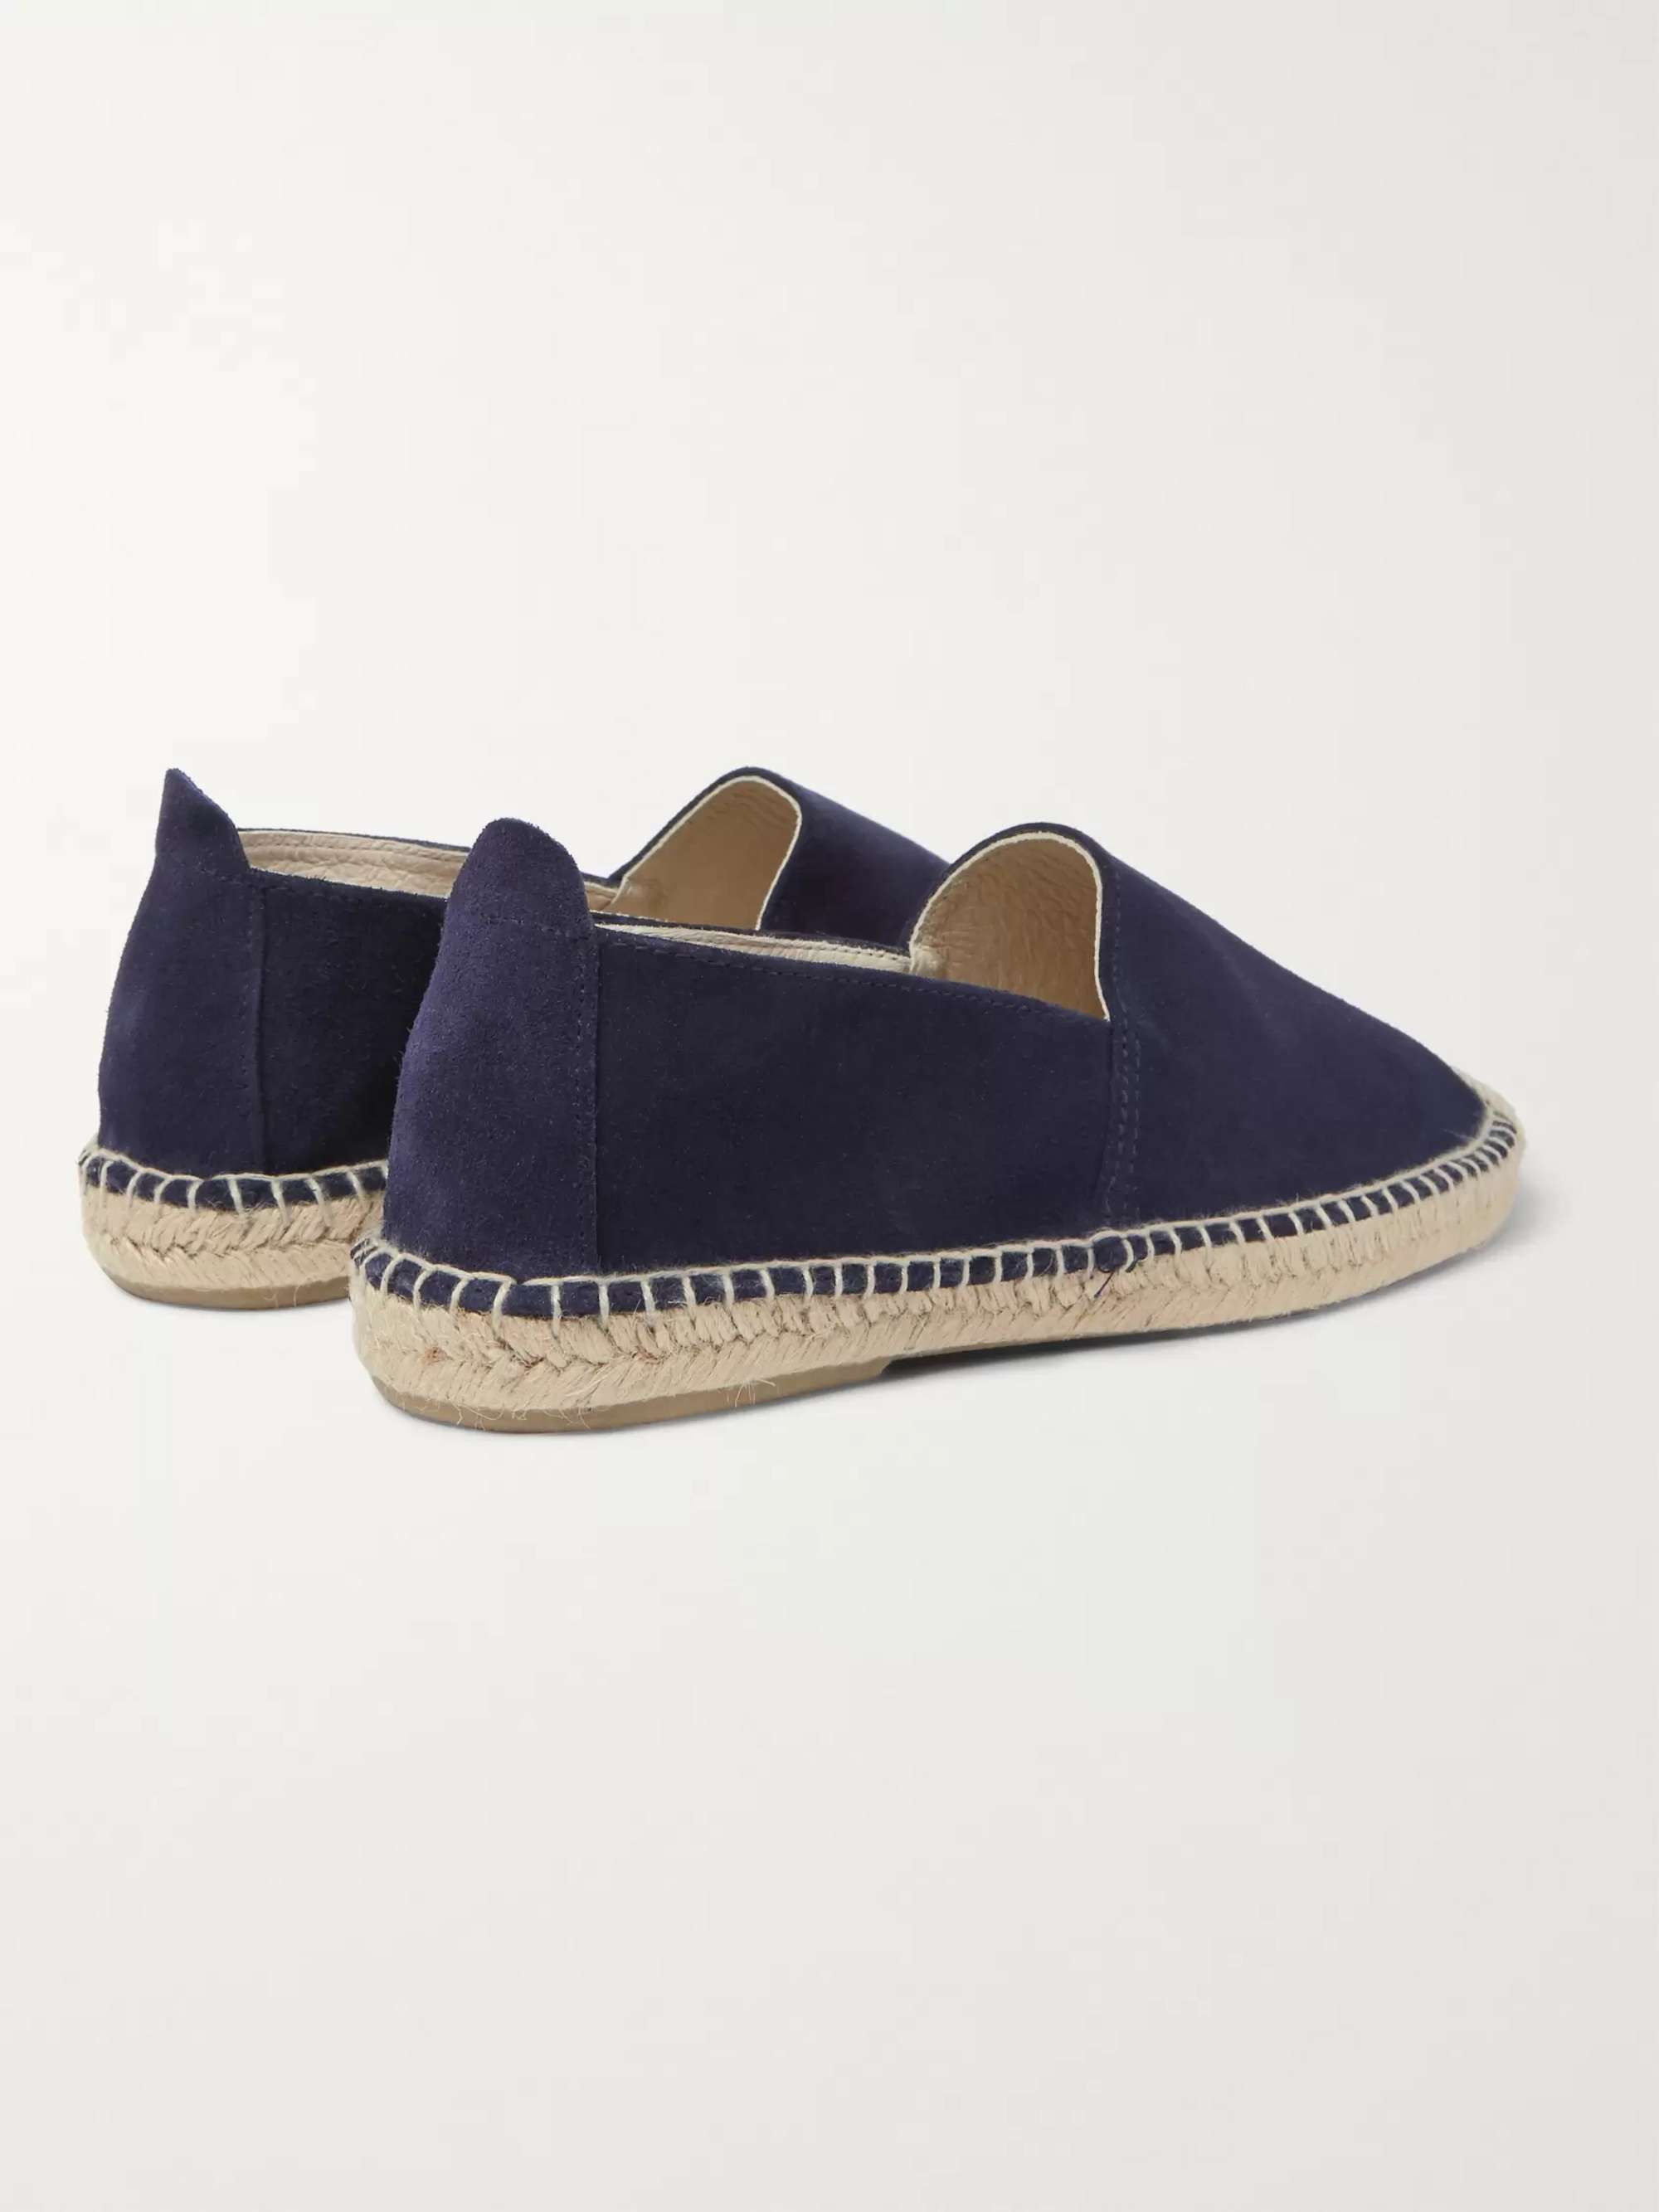 Anderson & Sheppard Suede Espadrilles in Blue for Men Mens Shoes Slip-on shoes Espadrille shoes and sandals 